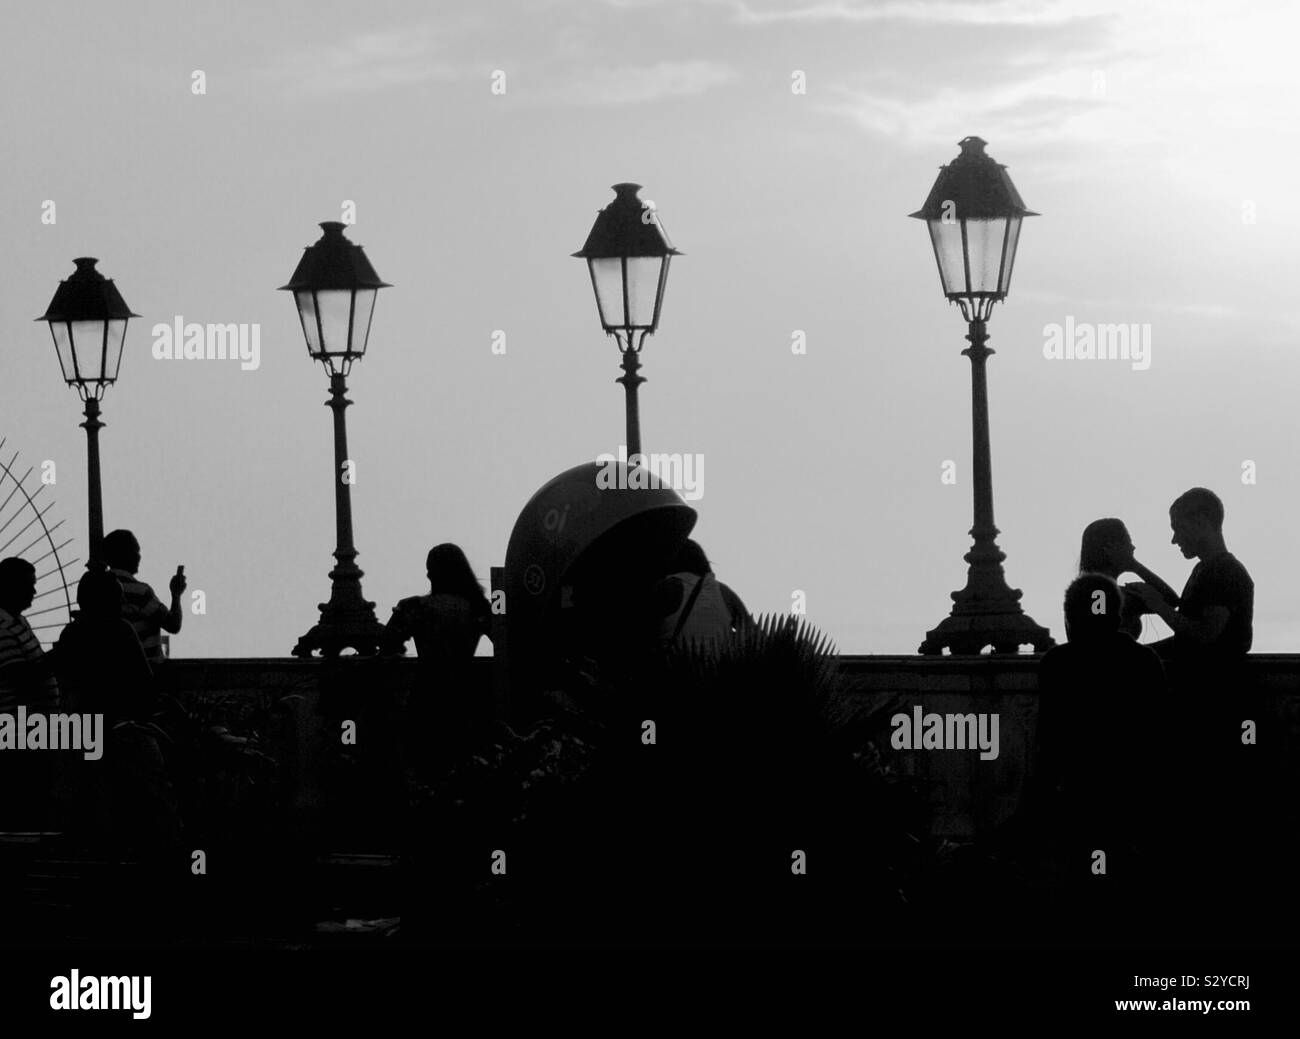 silhouette of lanterns and people at the Municipal Square in Salvador, Bahia Stock Photo